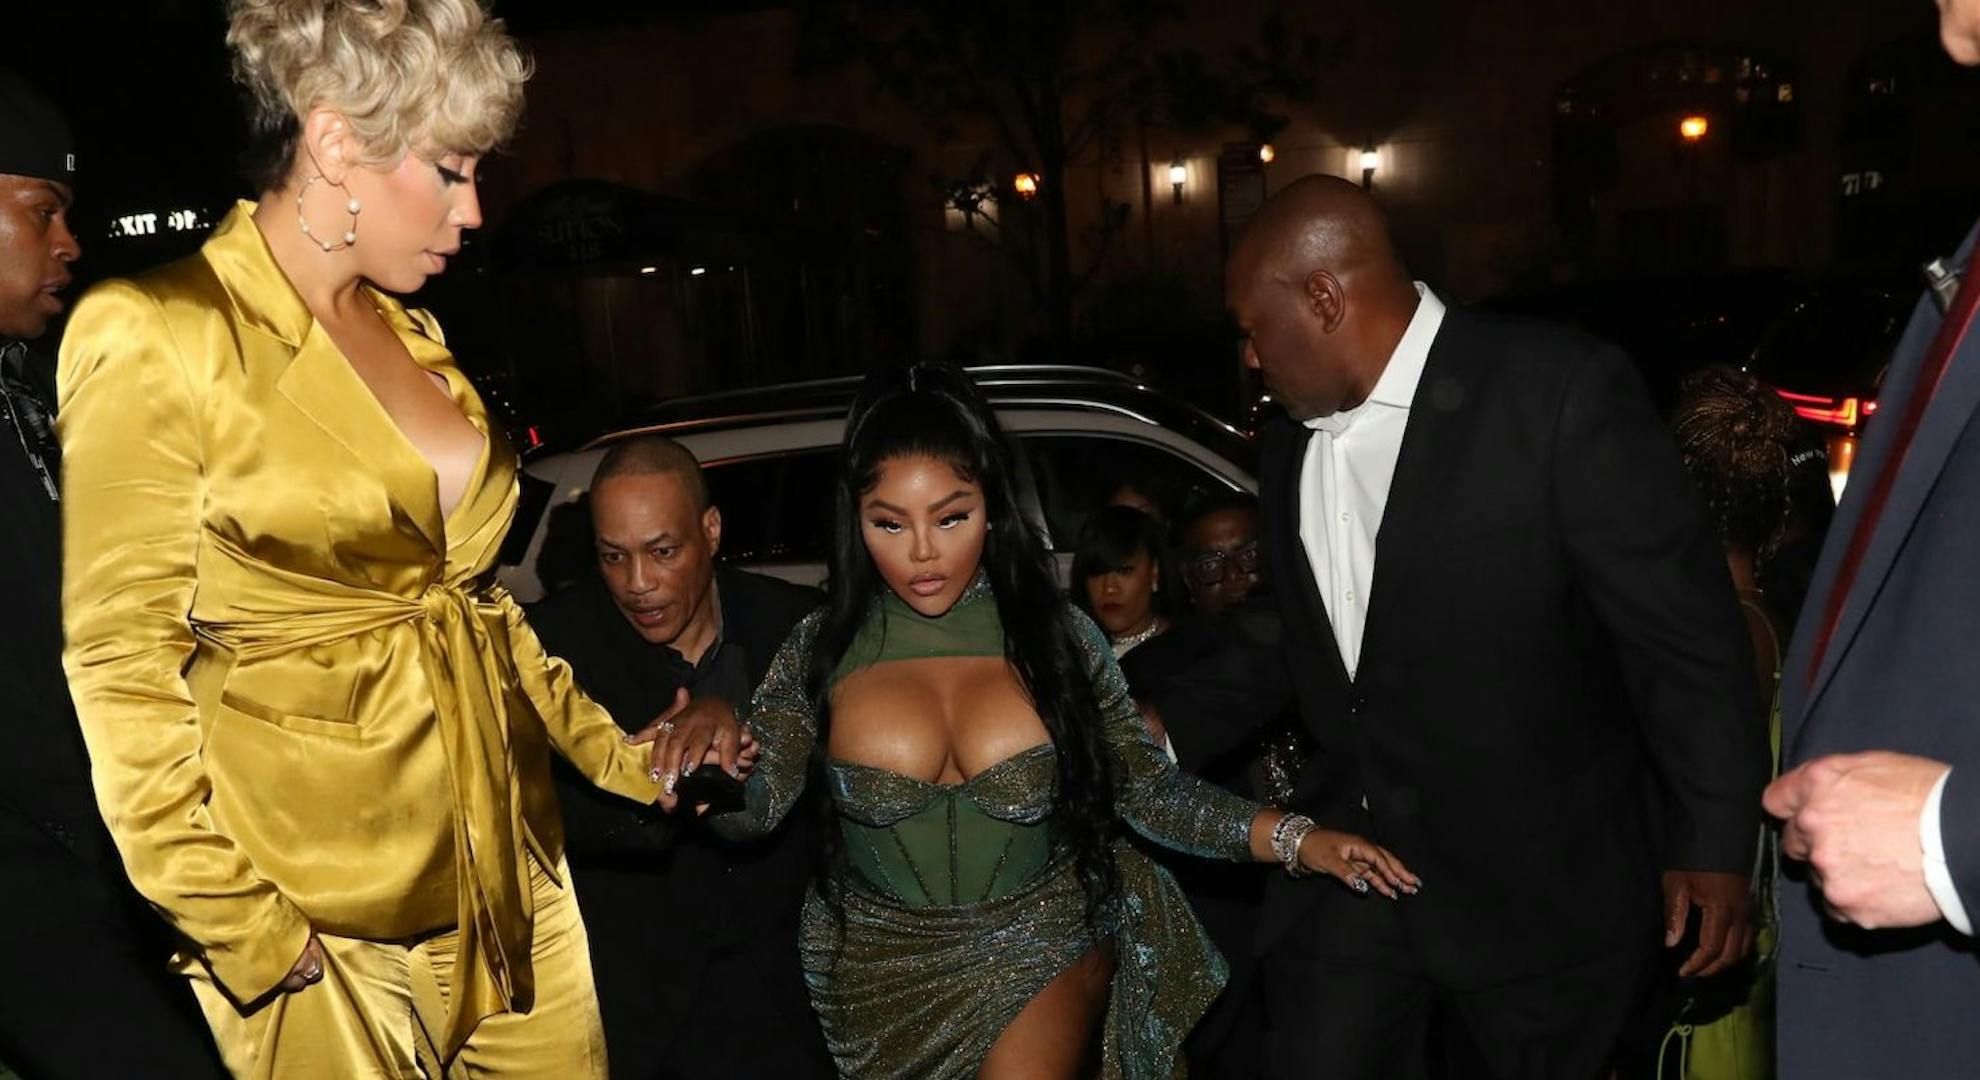 Alyi V and Lil' Kim arrive to the CJ Wallace & Lexus Celebrate Hip-Hop and Honor the Life of Christopher Wallace (a.k.a The Notorious B.I.G) at the Lil' Kim Tribute Gala at Gustavino's on May 20, 2022 in New York City. (Photo by Johnny Nunez/Getty Images for Lexus)